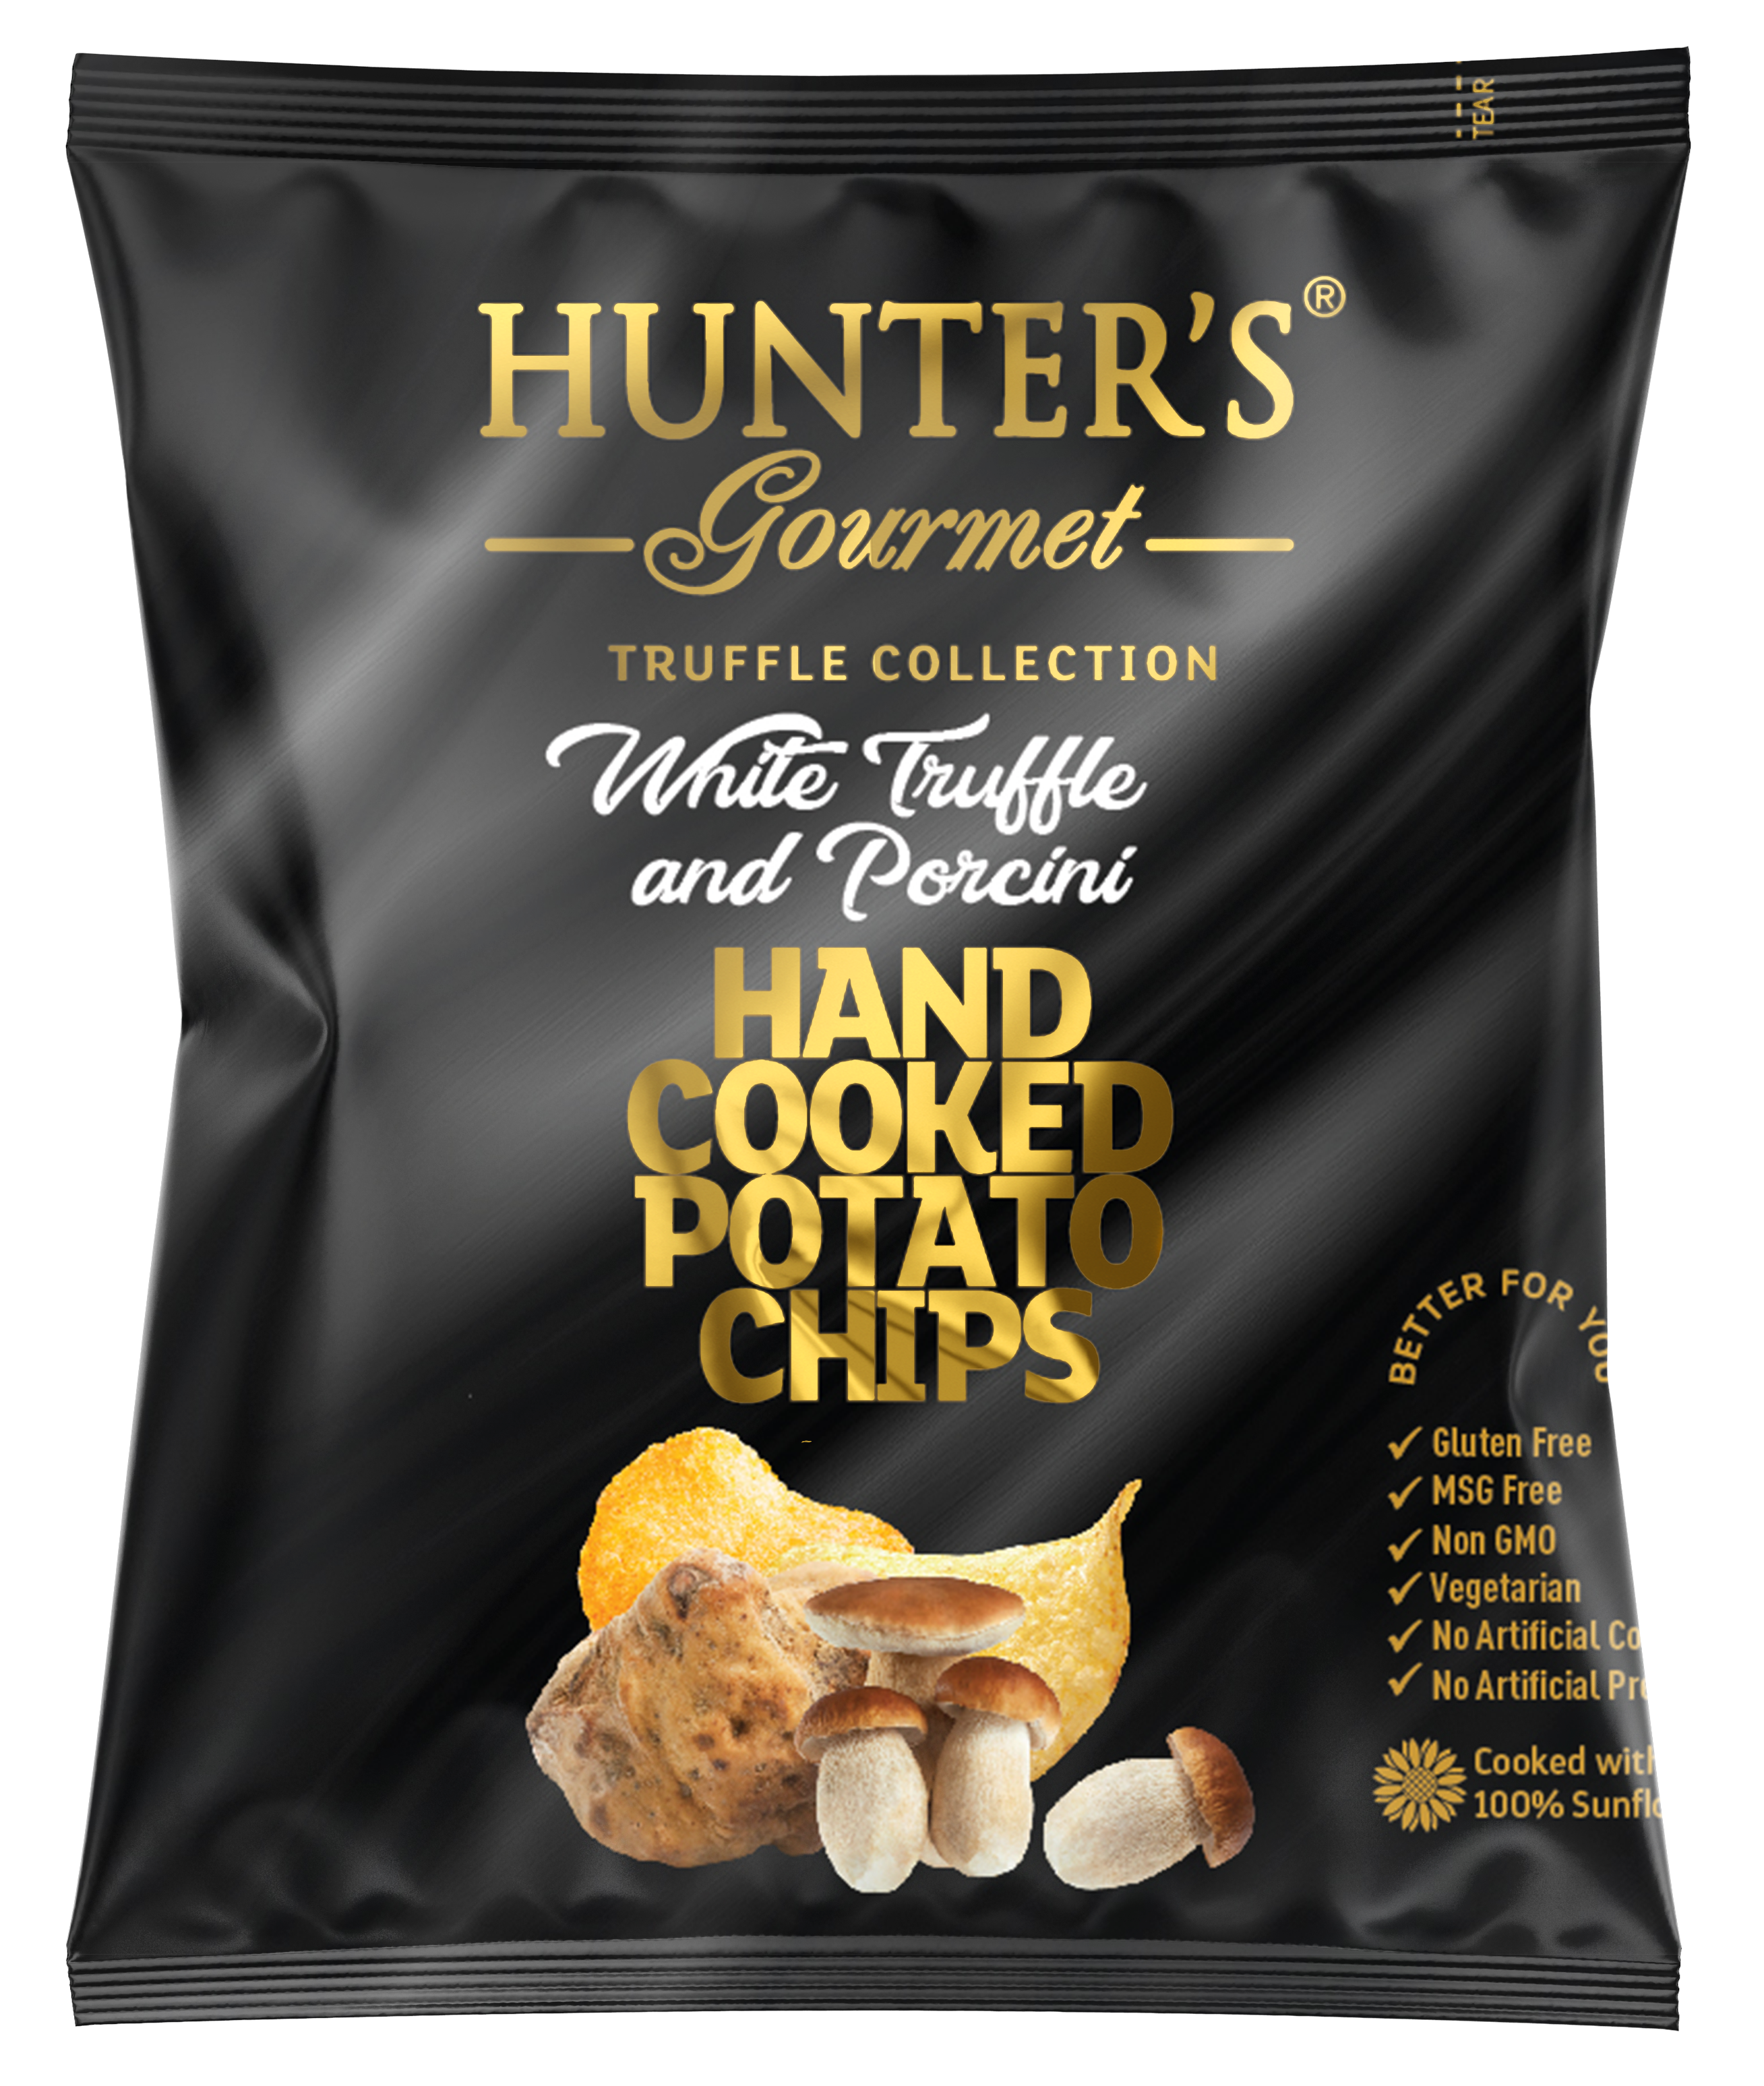 Hunter's Gourmet Hand Cooked Potato Chips White Truffle and Porcini 50 units per case 25 g